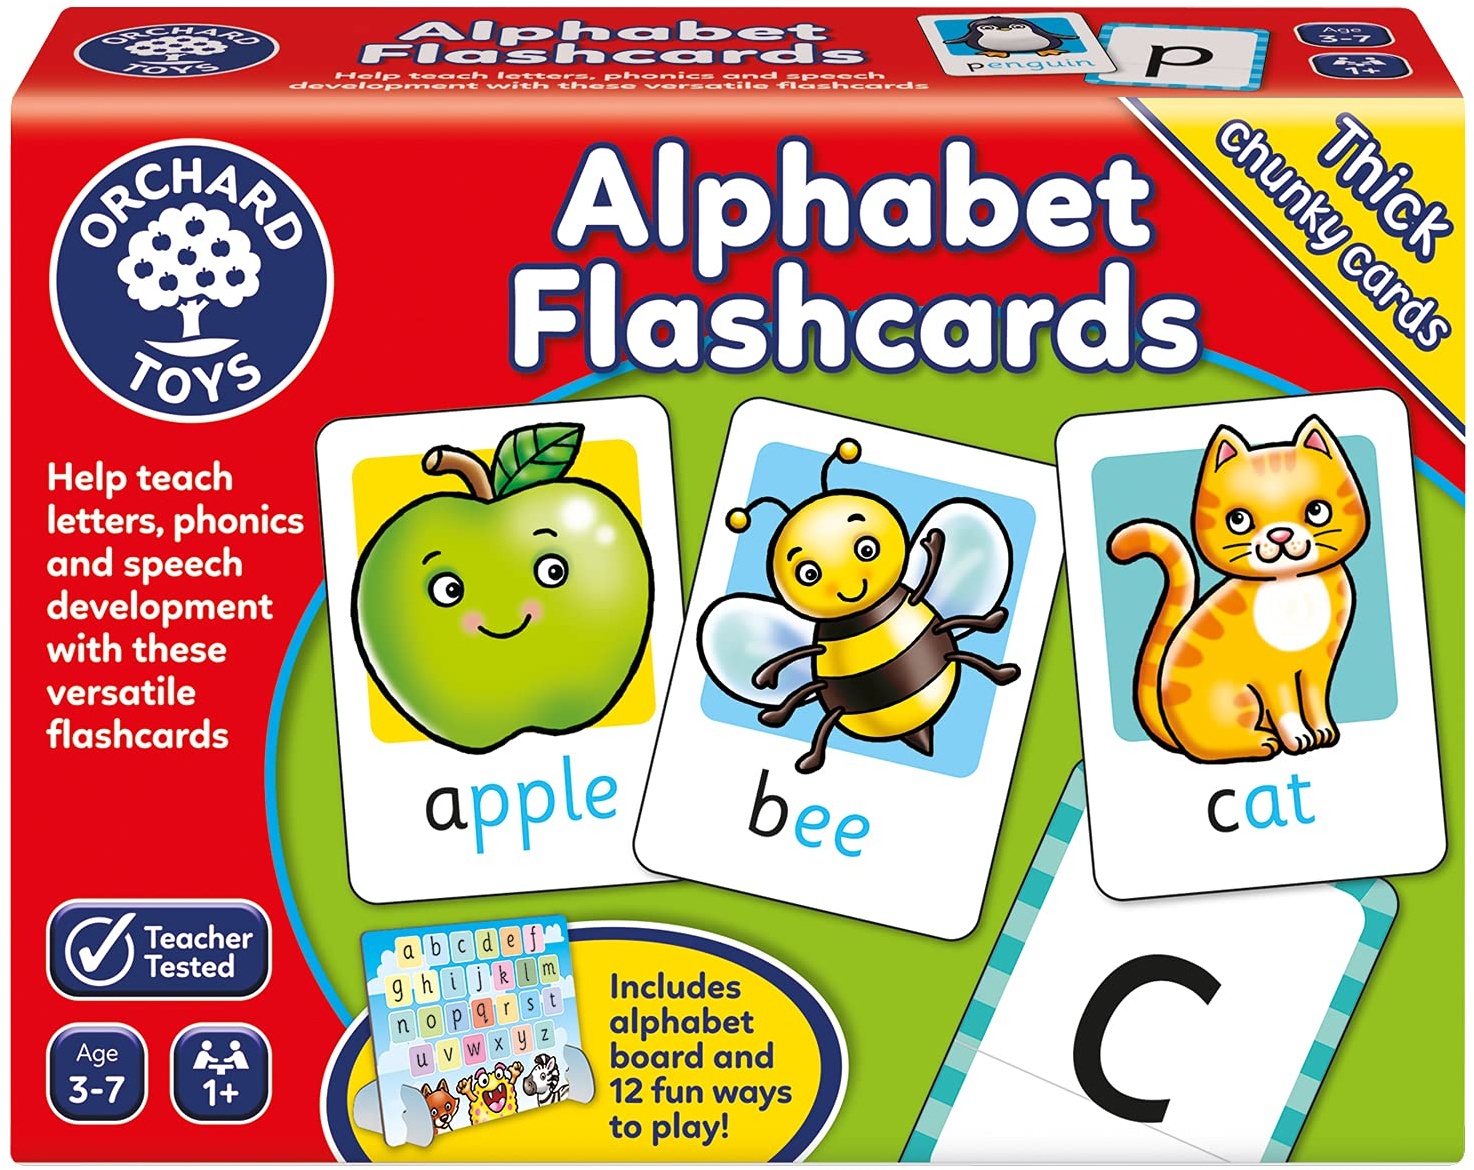 Orchard Toys Alphabet Flashcards, 26 Educational Double-Sided Flashcards, Teach The Letters of The Alphabet, Perfect for Kids Age 3-7, Educational Toy